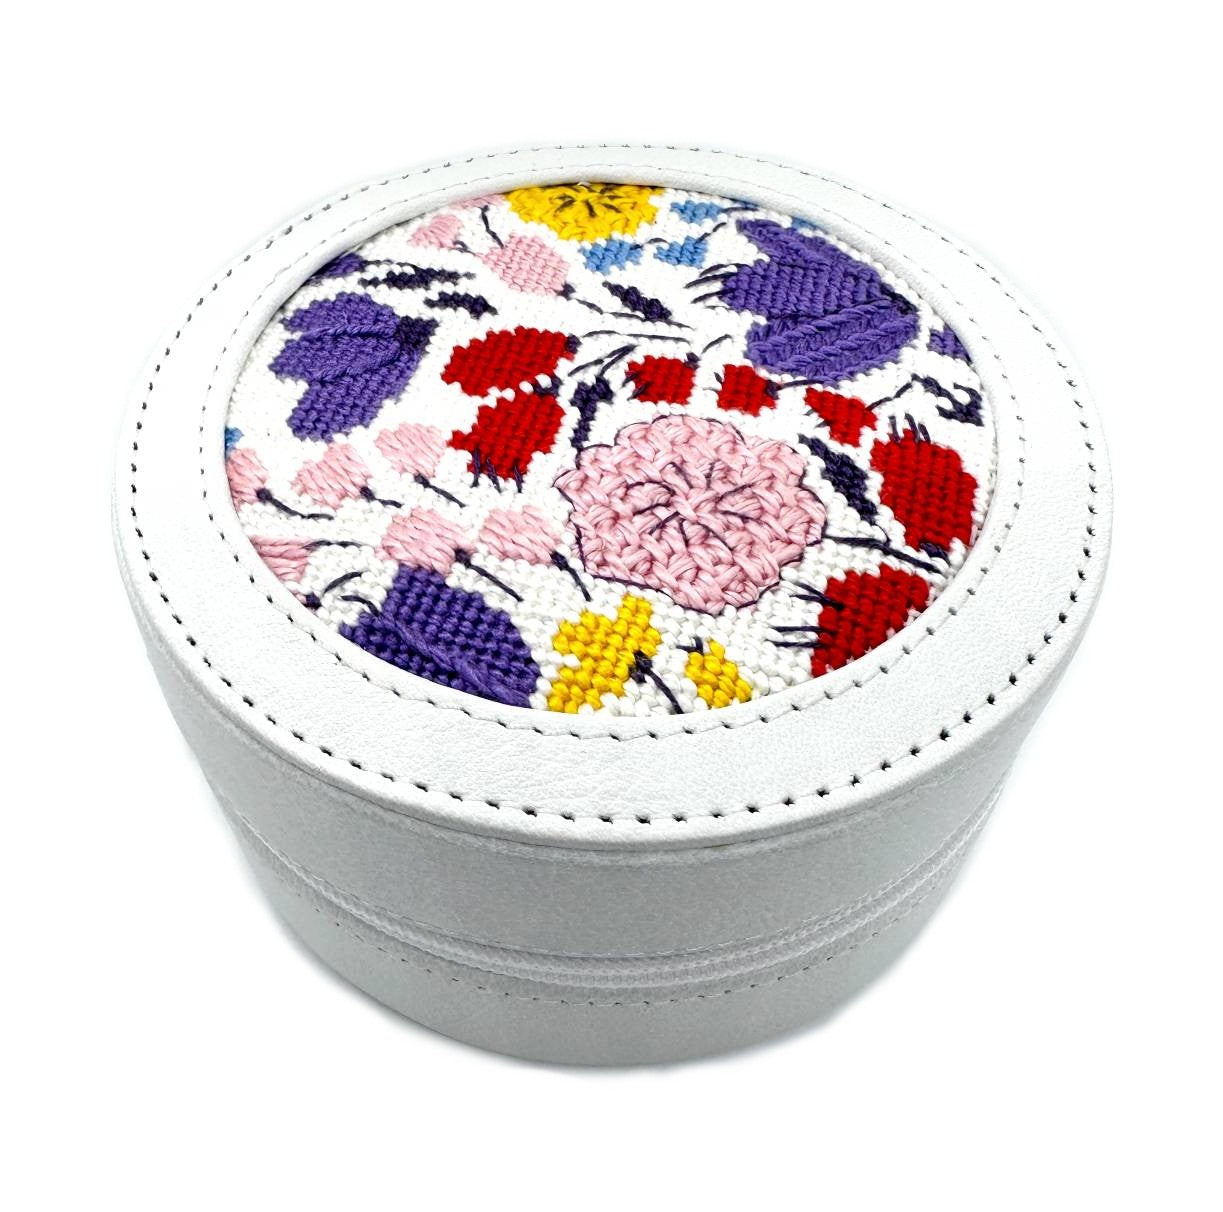 Round white leather box for needlepoint insert as a self-finishing project.